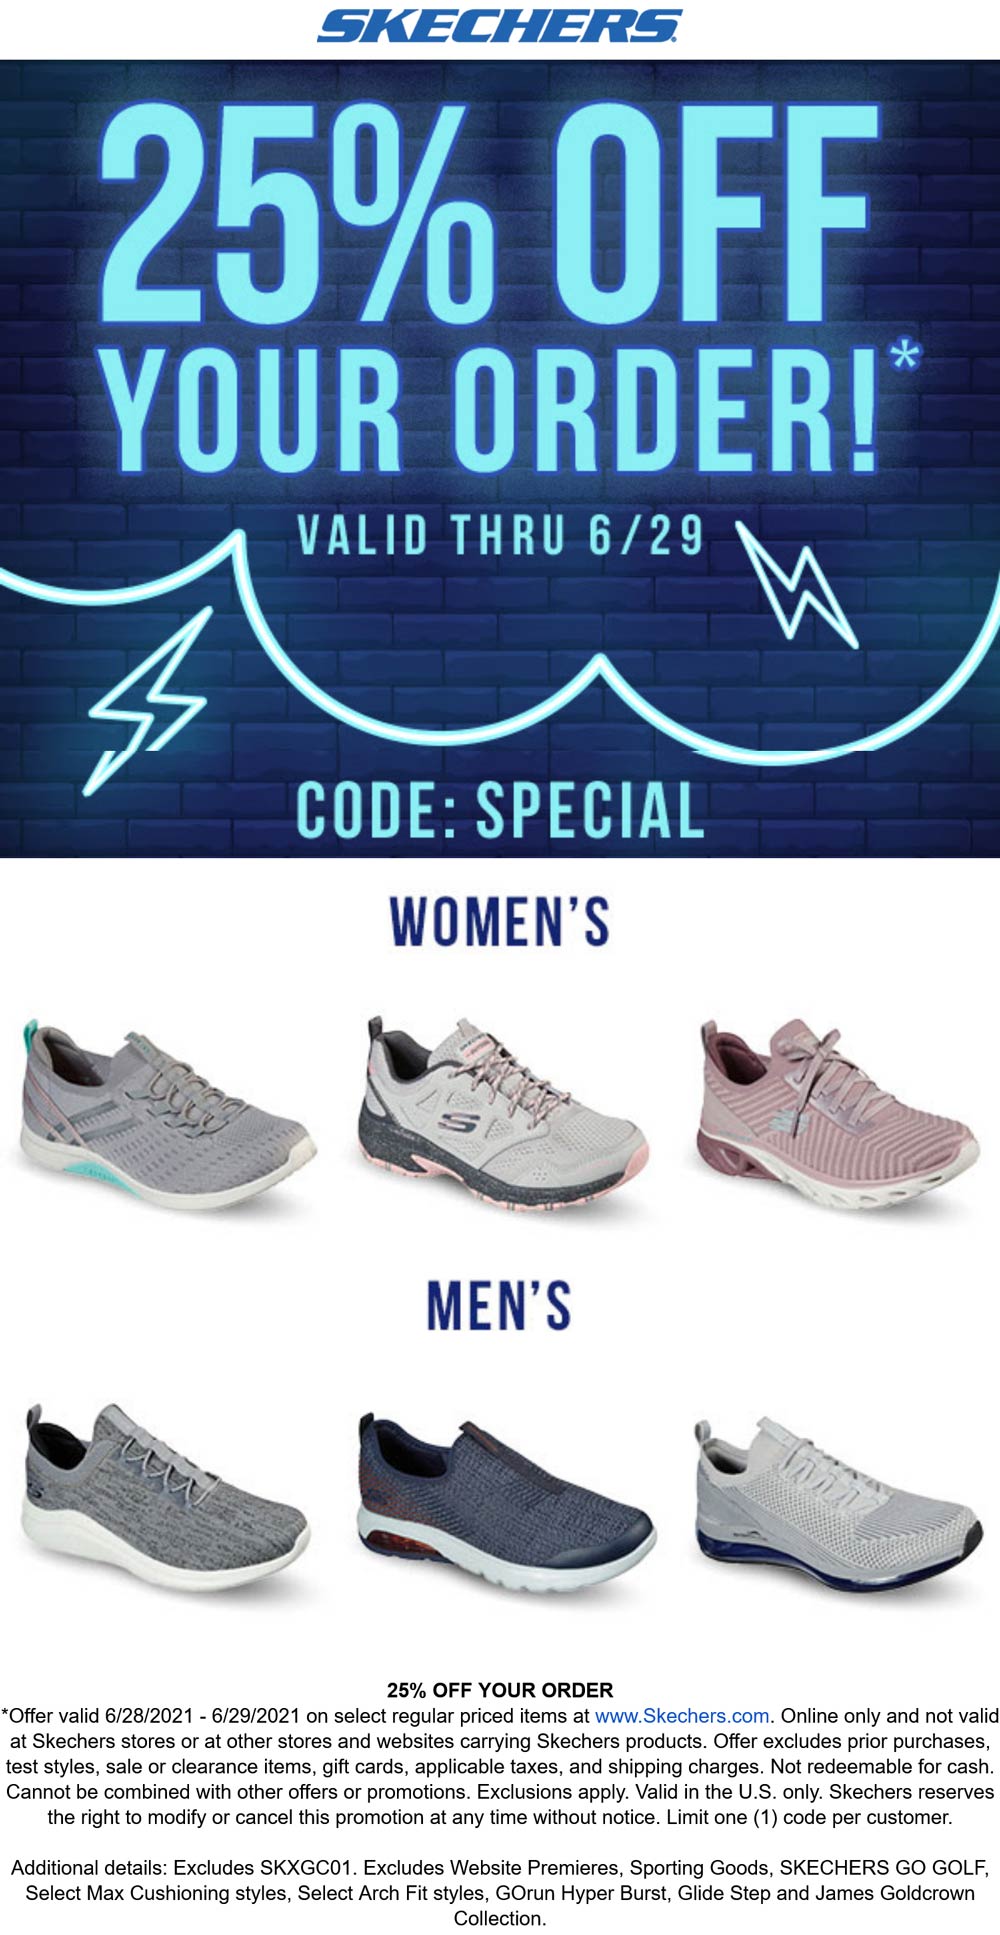 Skechers stores Coupon  25% off at Skechers shoes via promo code SPECIAL #skechers 